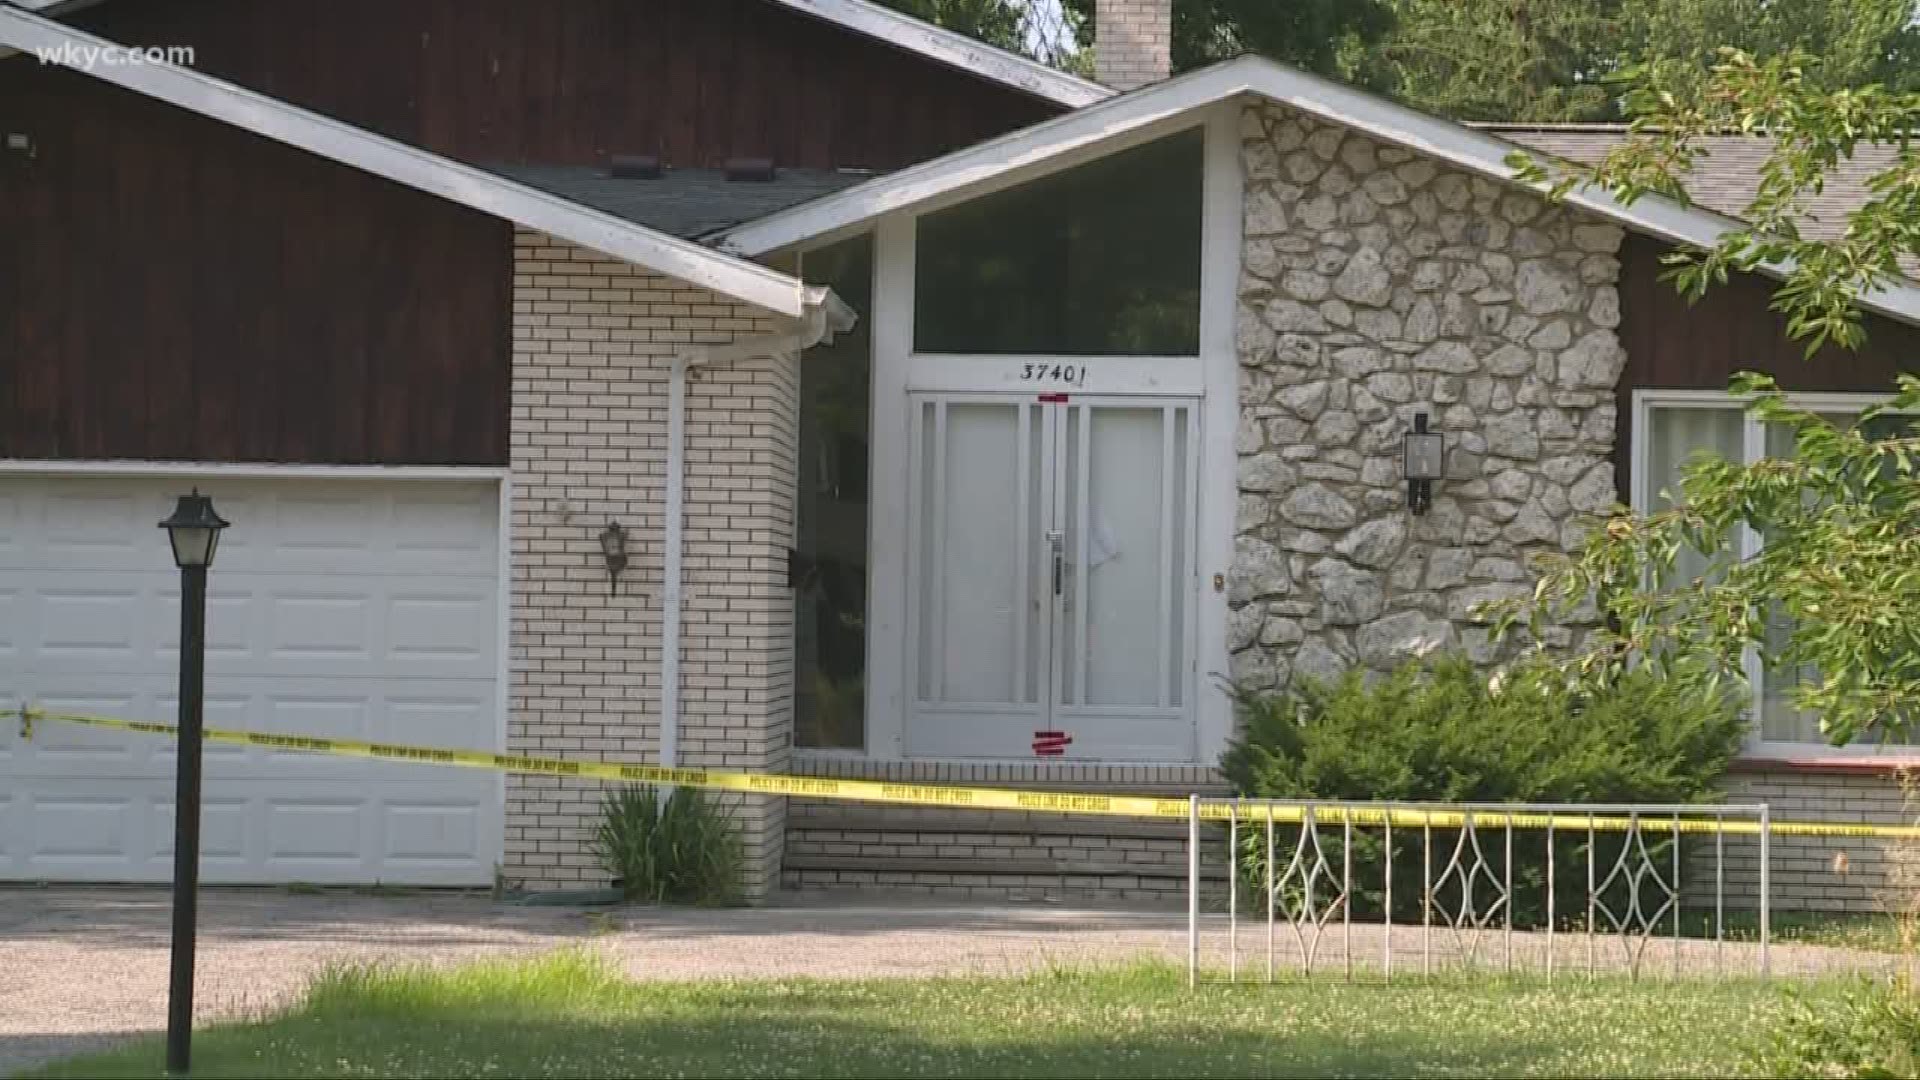 How is community reacting to 'suspicious death' in Willoughby?